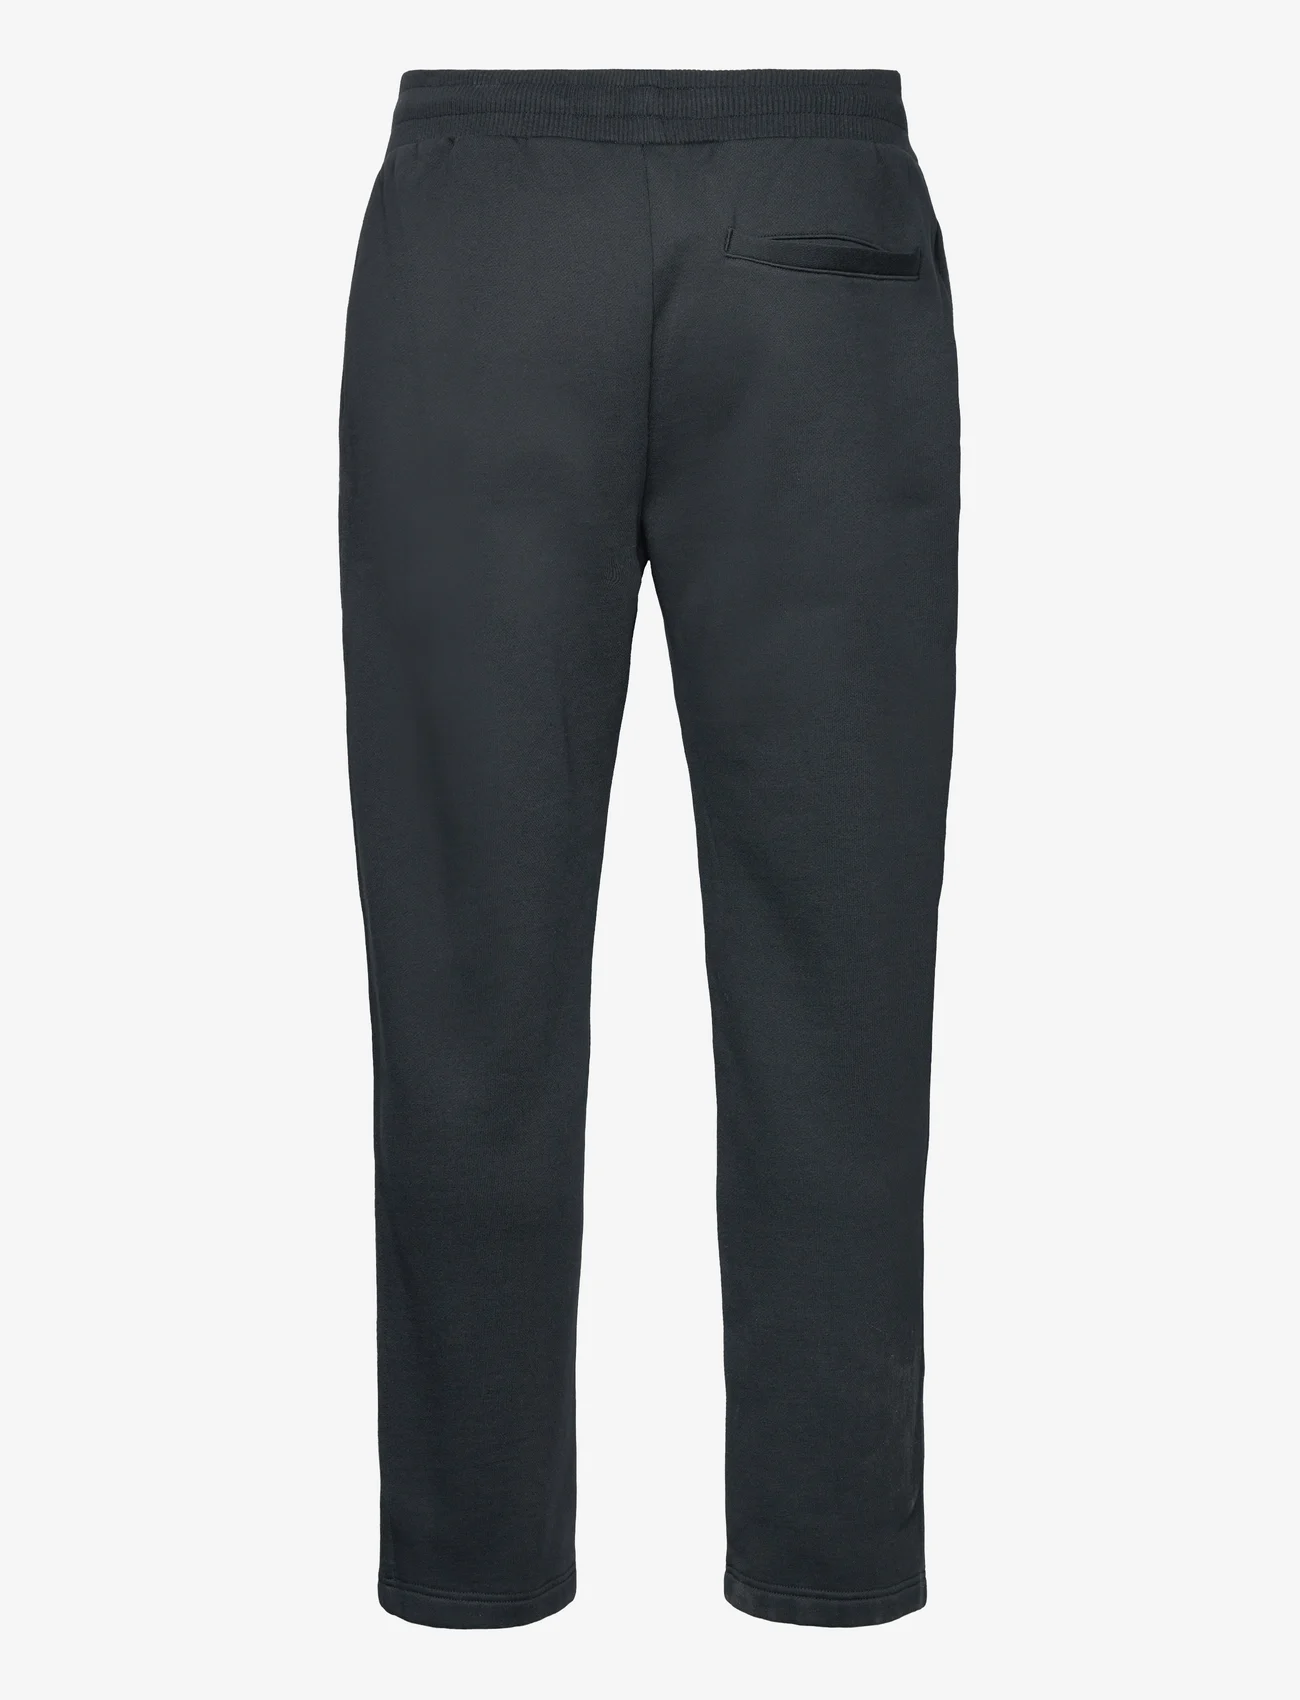 Abercrombie & Fitch - ANF MENS SWEATPANTS - joggingbyxor - casual black update - 1